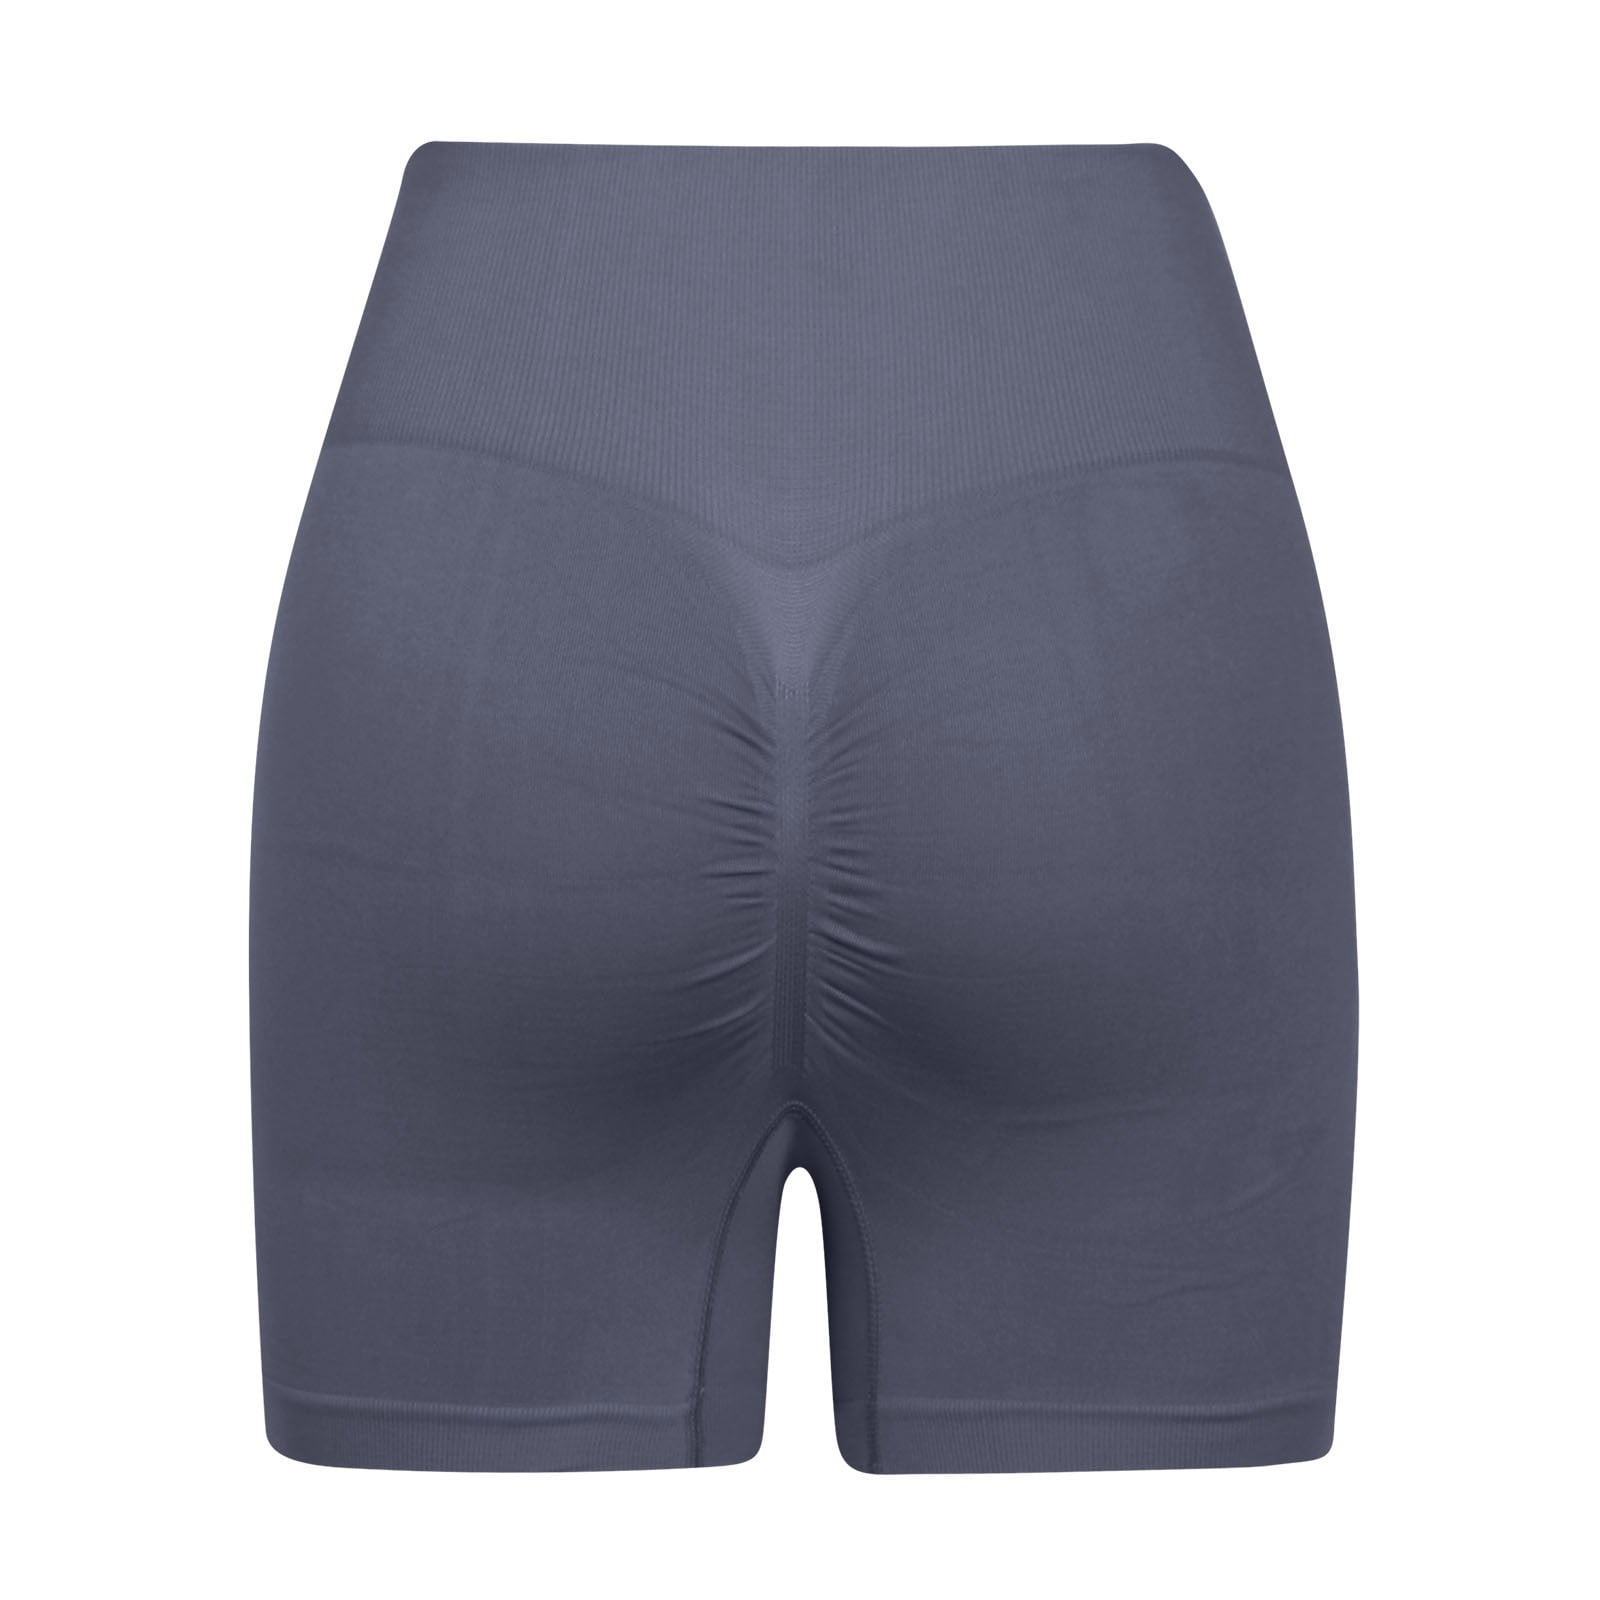 Rbaofujie Spandex Yoga Shorts with Pockets for Women, Low Waisted